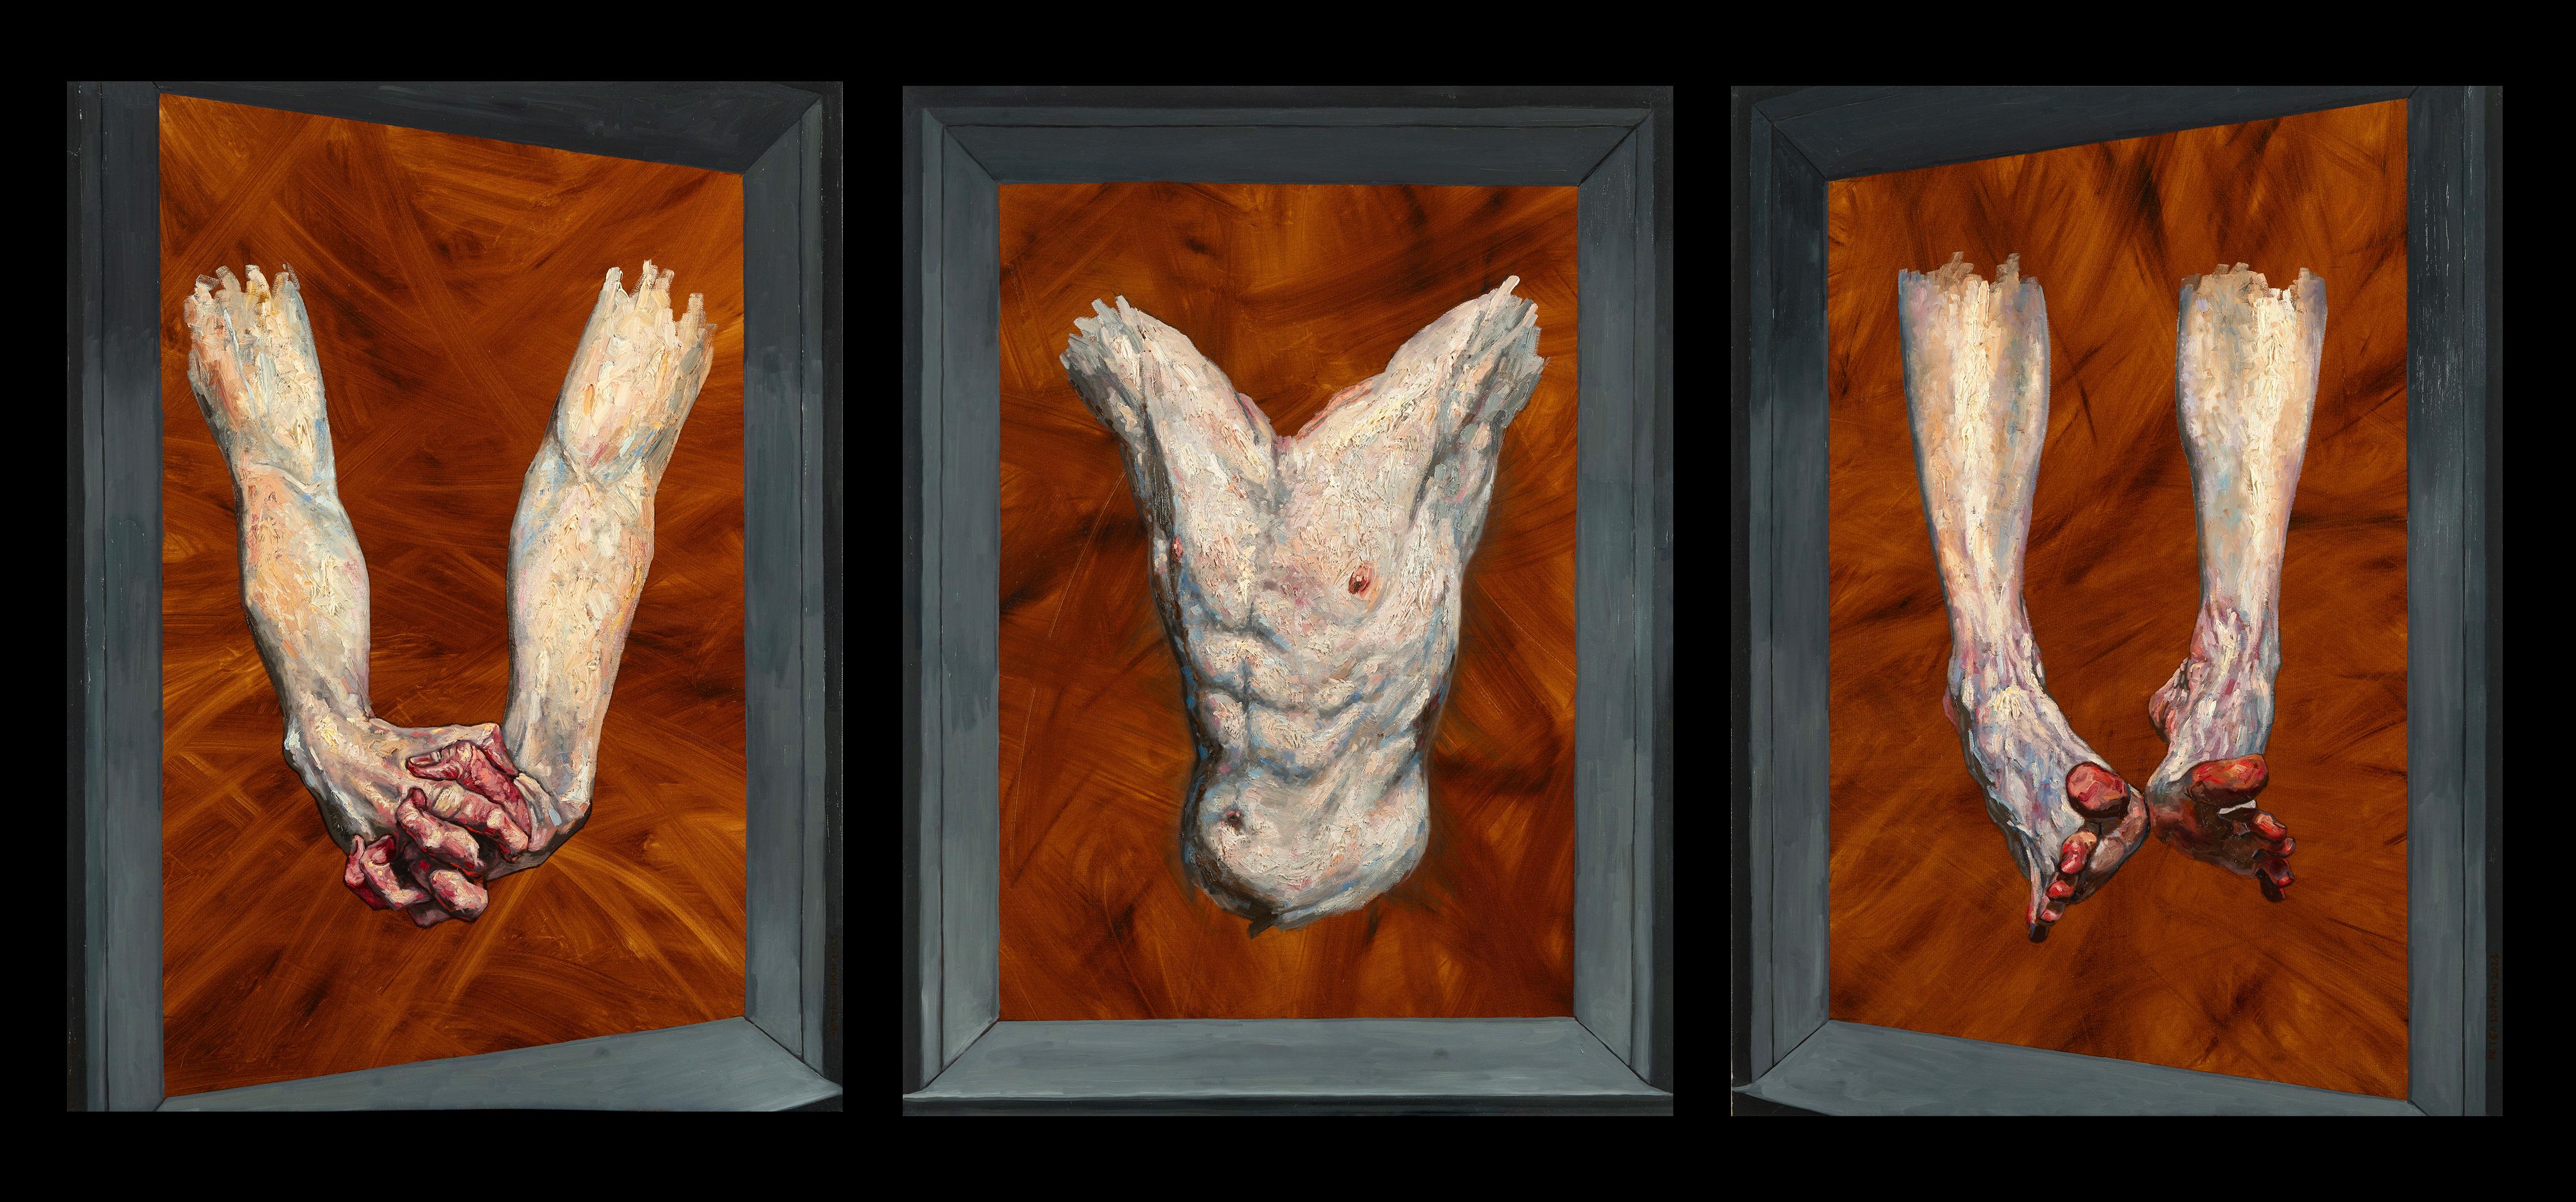 Peter Lupkin Nude Painting - Deconstructed Self Portrait, Triptych, Framed, Original Oil Painting